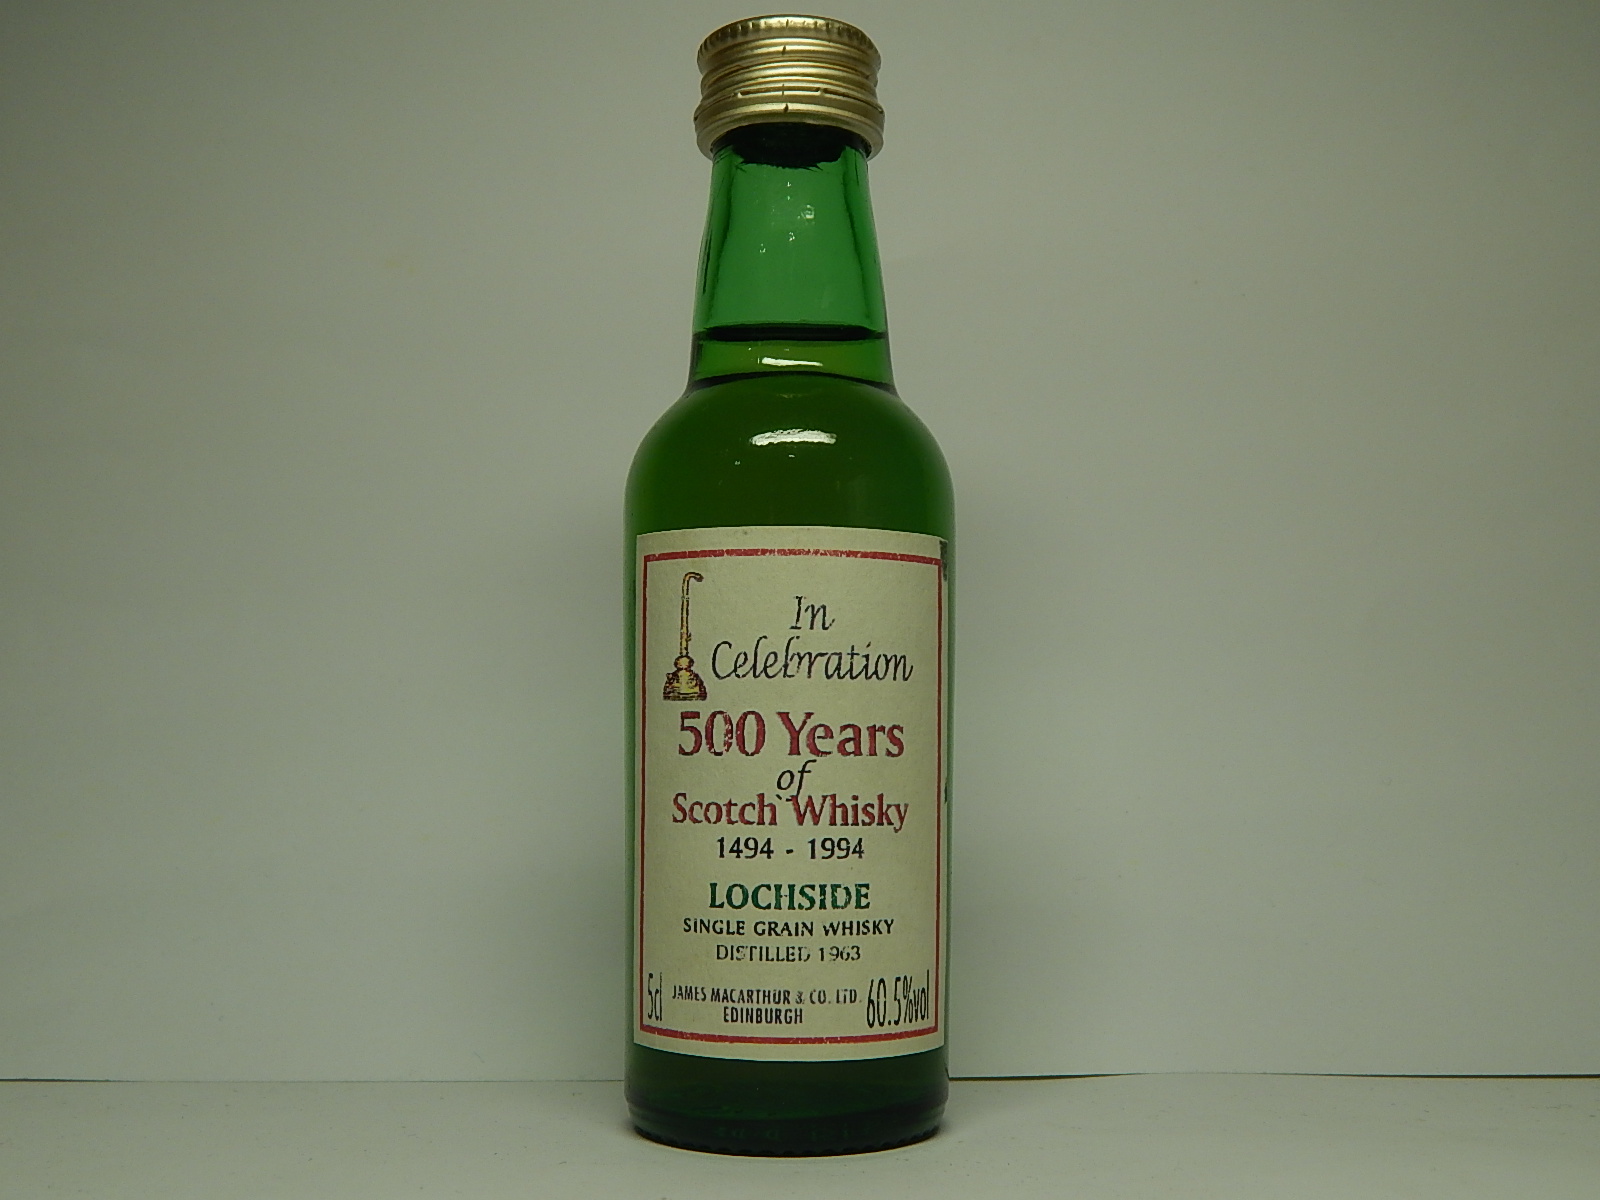 In Celebration 500 years SMSW 1963 "James MacArthur´s" 5cl 60,5%vol